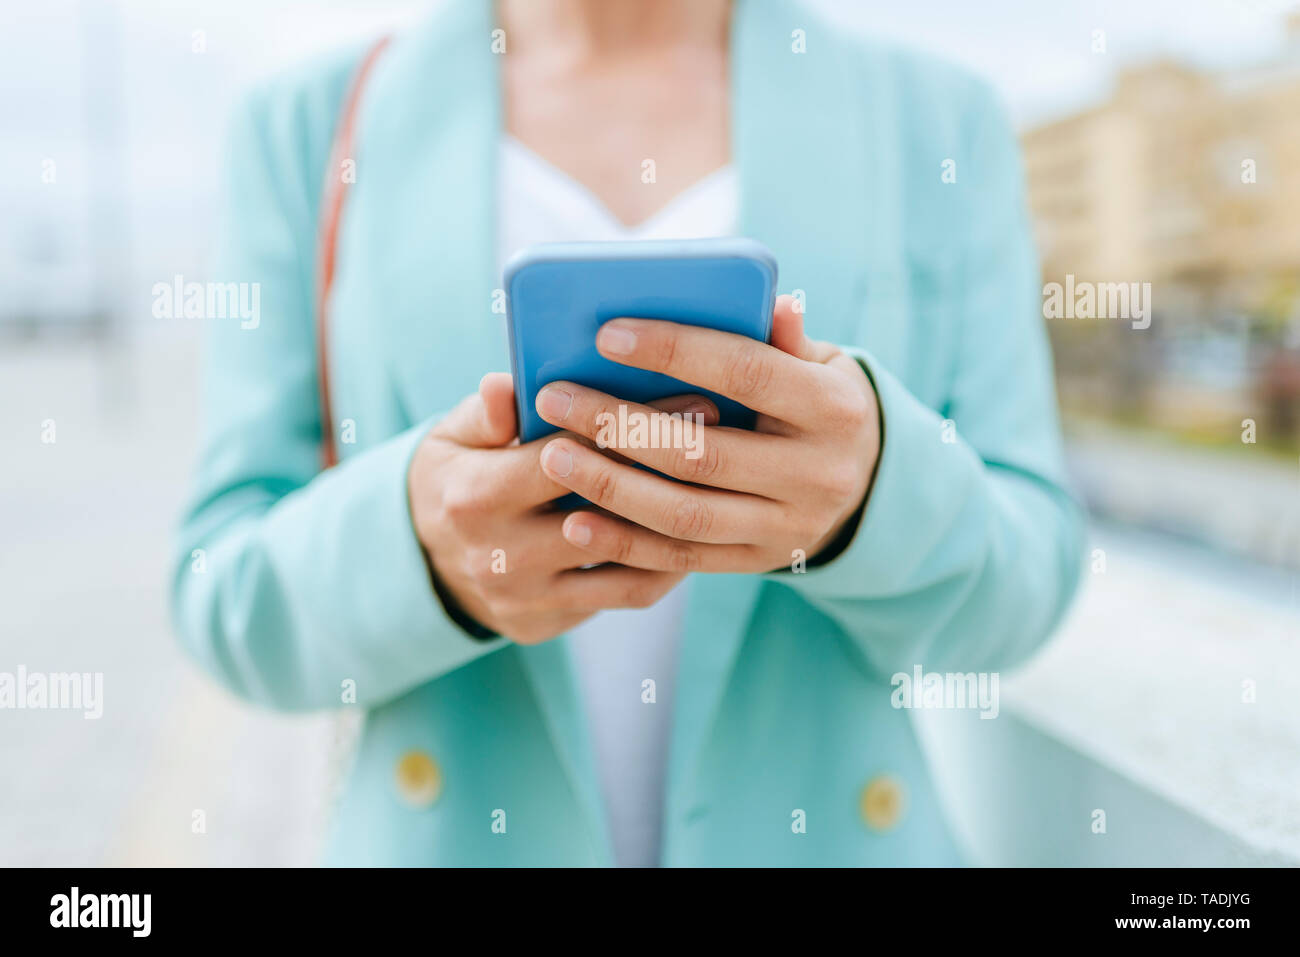 Close-up of woman's hands with smartphone Stock Photo